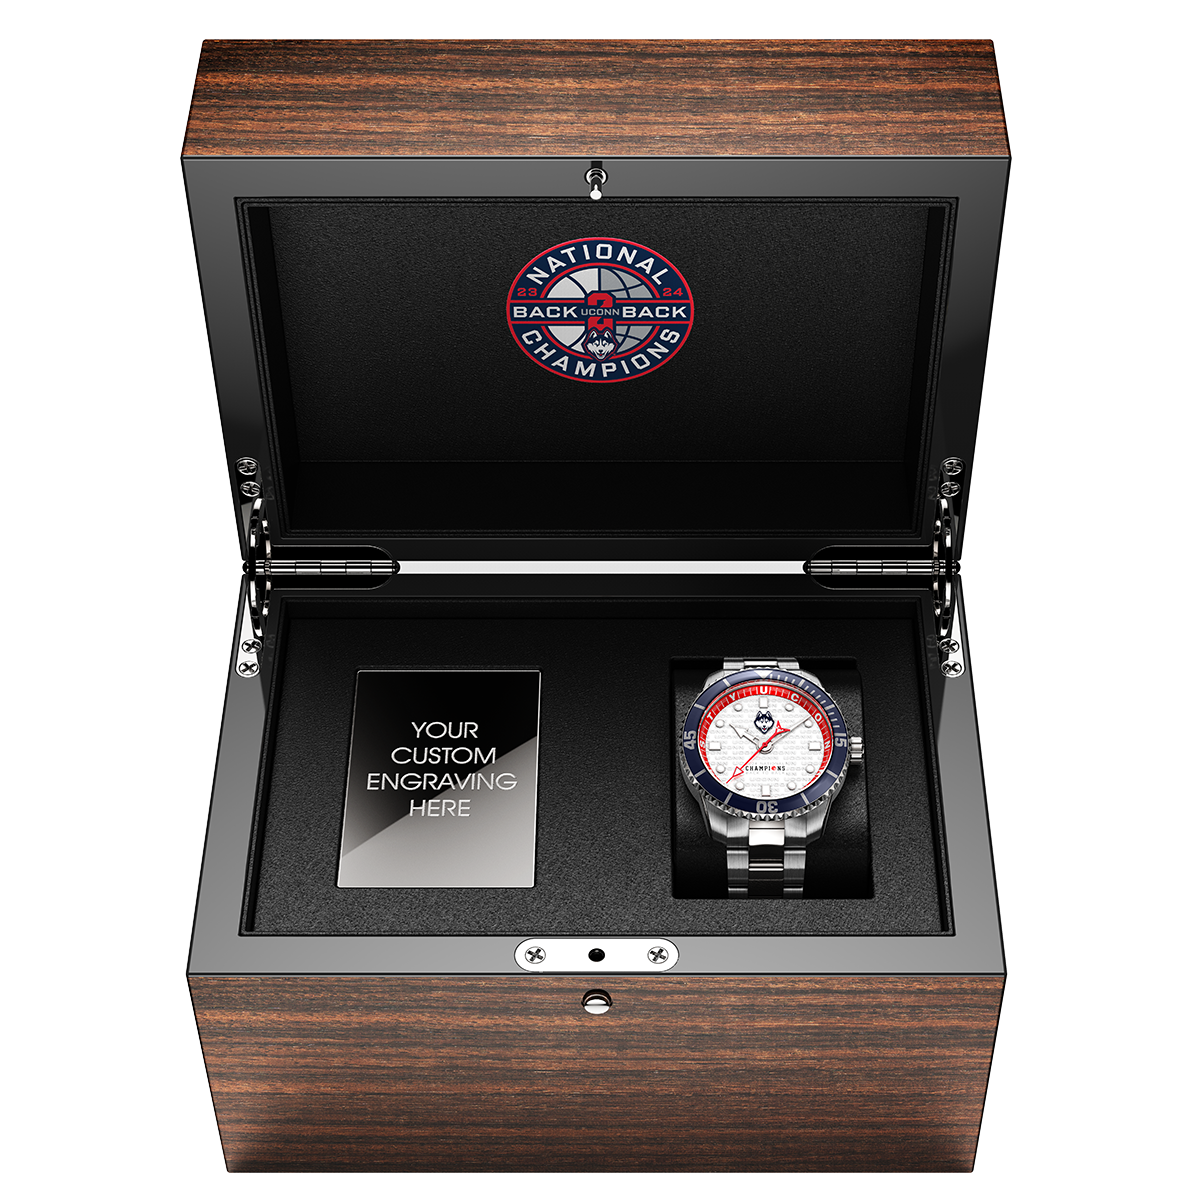 UCONN 2024 National Champions Swiss made automatic watch. Back to back champions. Wood display box, open.